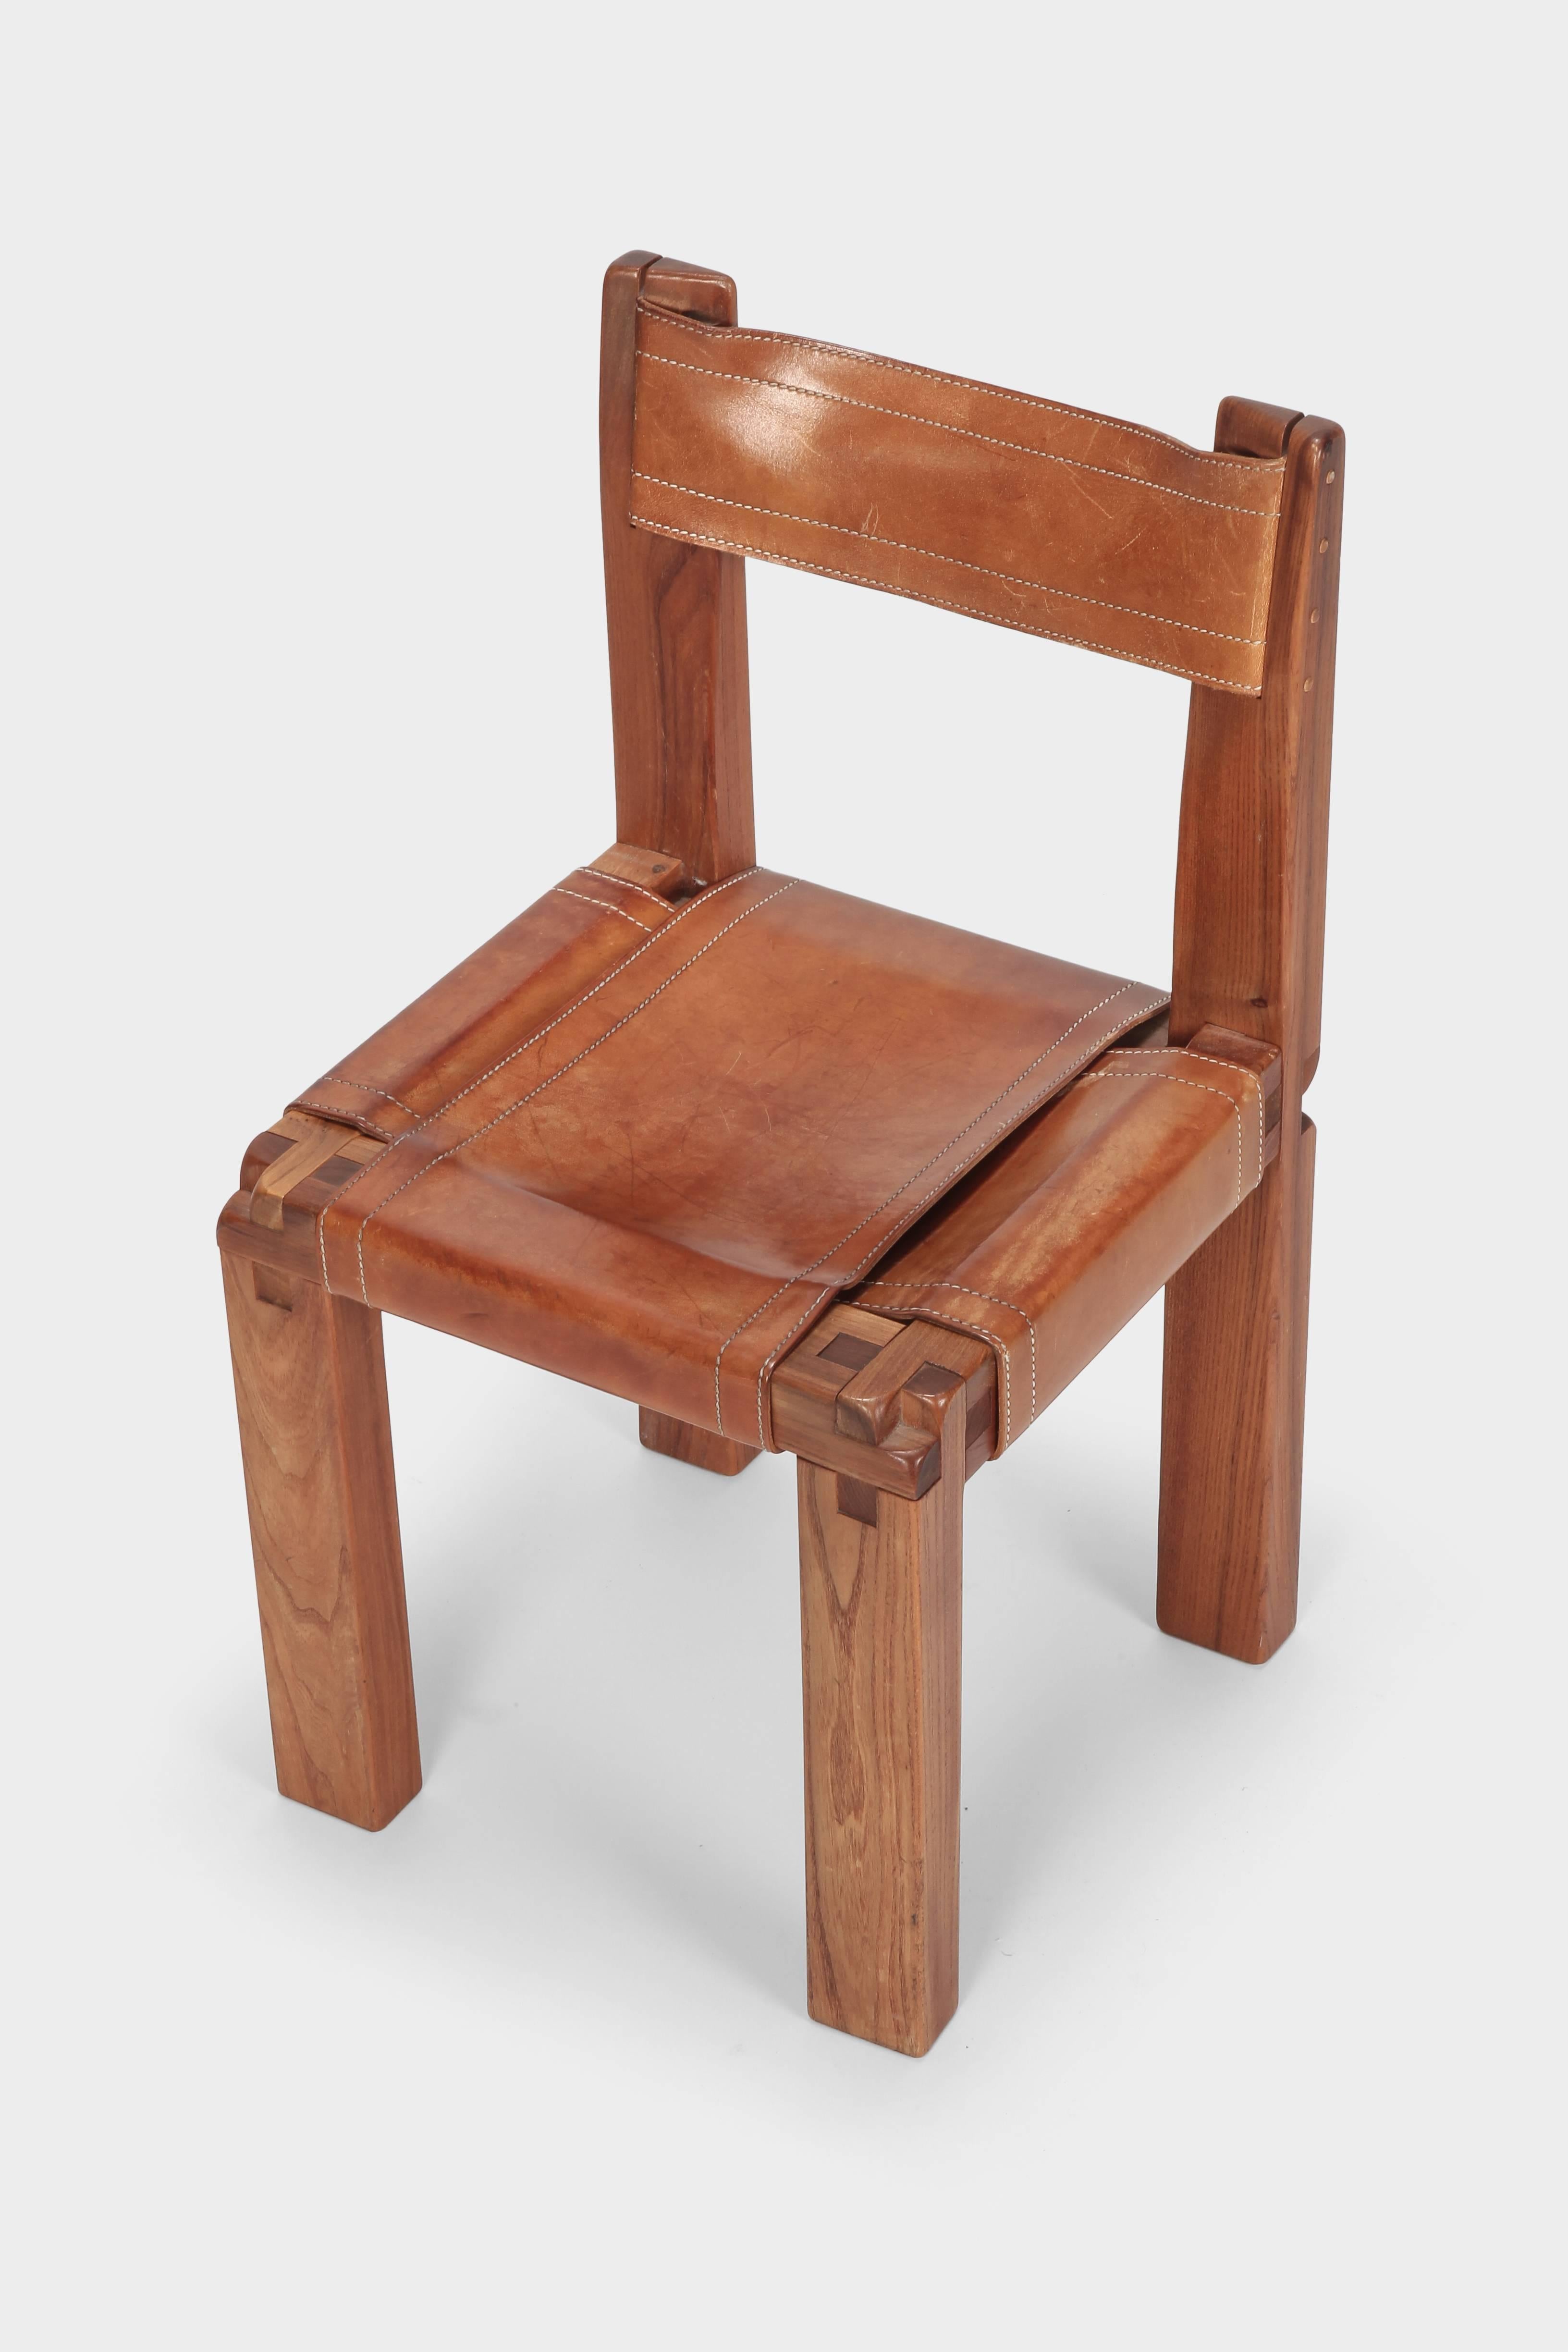 Pierre Chapo chair S11 manufactured in France in the 1960s. Solid elmwood frame, cognac brown saddle leather seating and back. This chair has a cubic design and shows absolutely stunning wood joints. The thick saddle leather is beautifully patinated